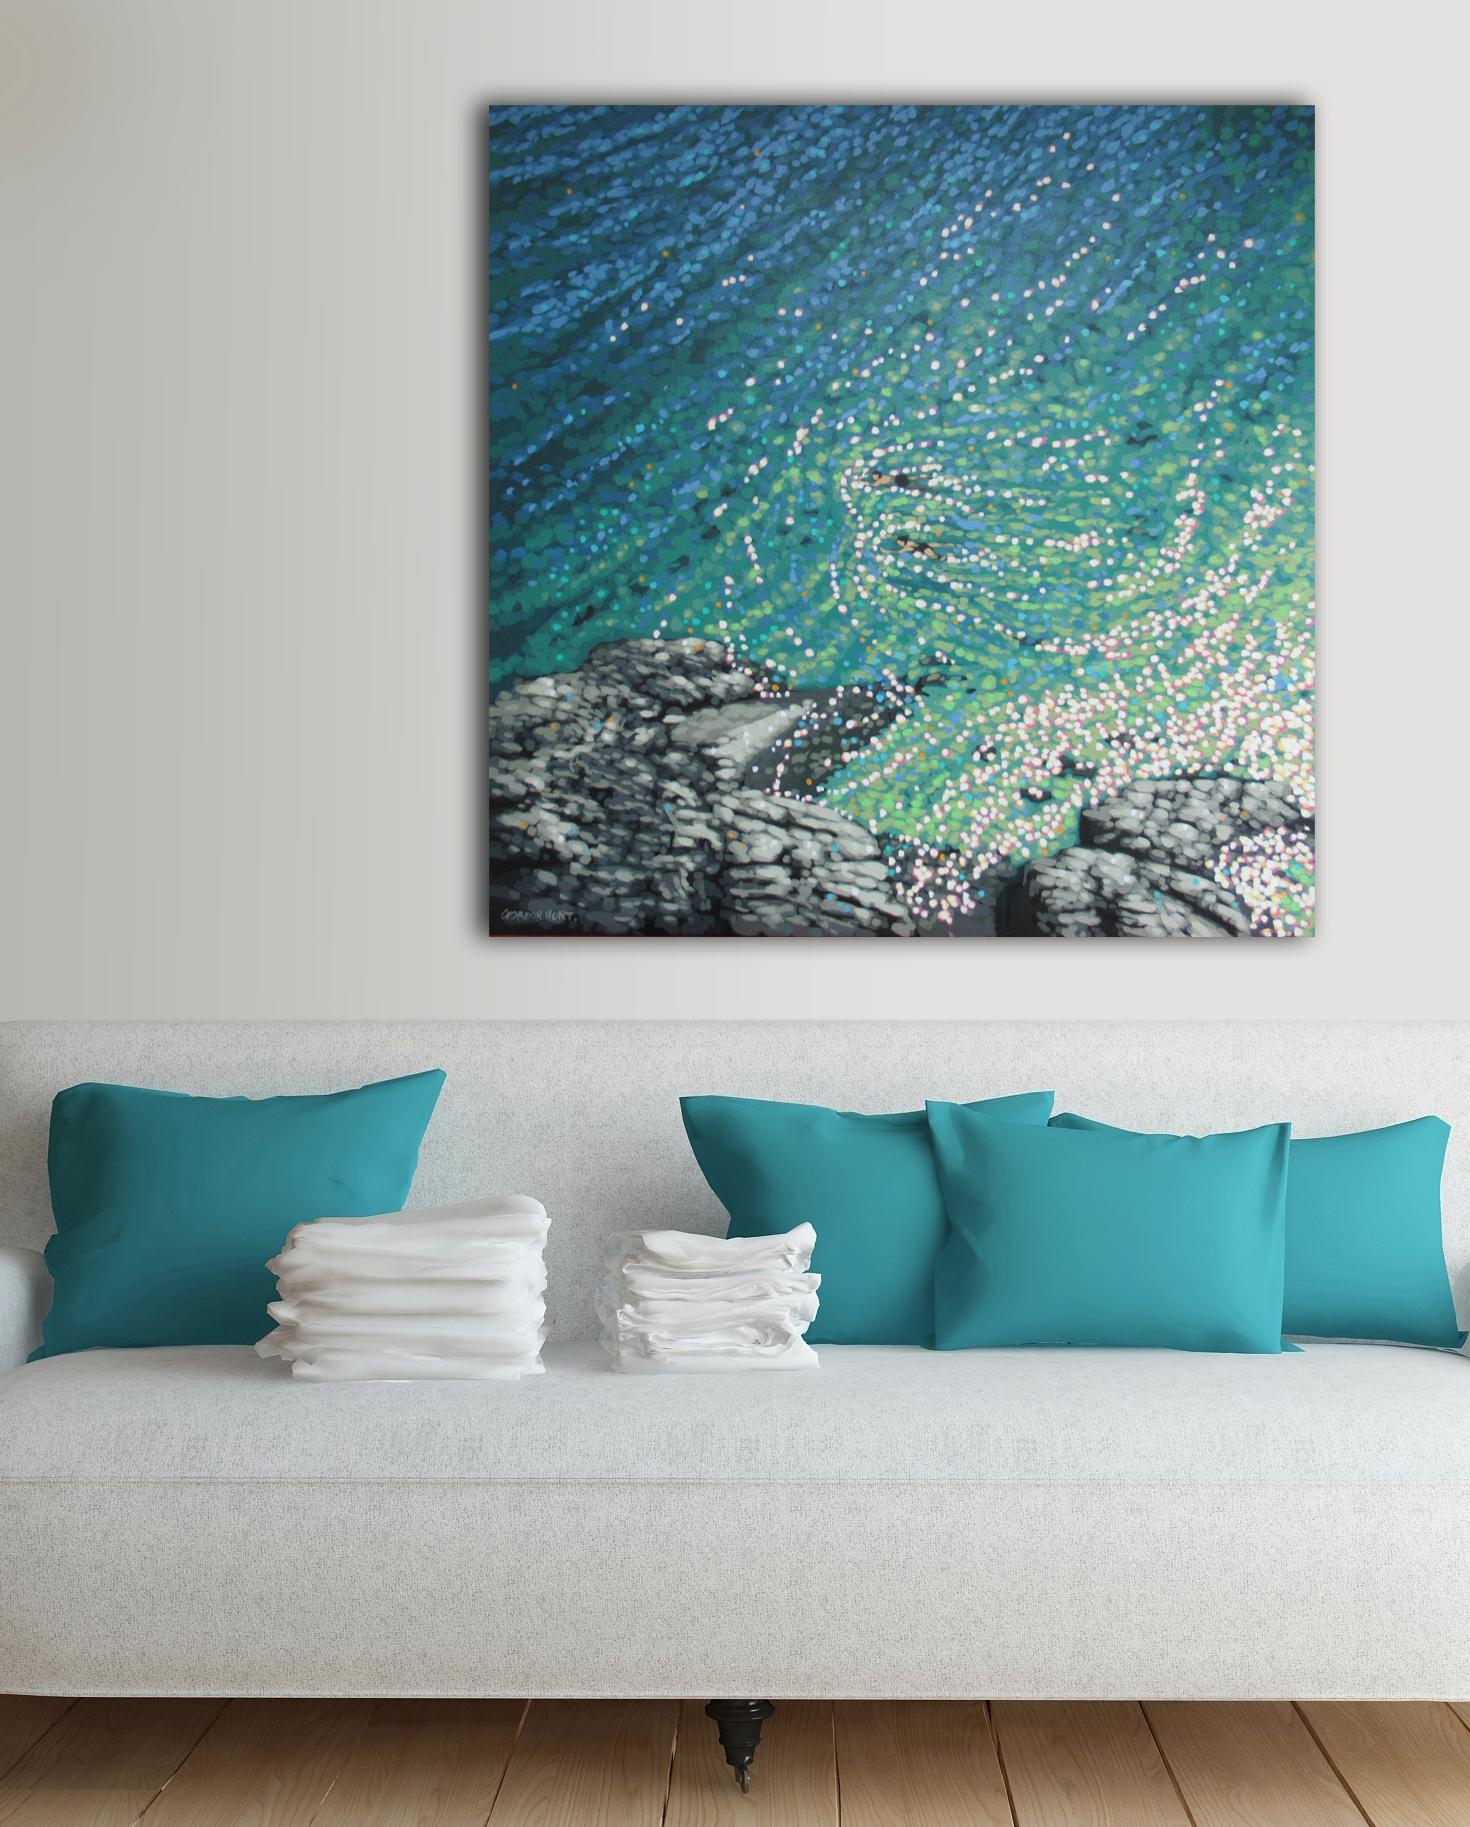 Cornwall cove swim by Gordon Hunt [2022]
original

Acrylic on deep edge stretched Belgium linen

Image size: H:100 cm x W:100 cm

Complete Size of Unframed Work: H:100 cm x W:100 cm x D:4cm

Sold Unframed

Please note that insitu images are purely